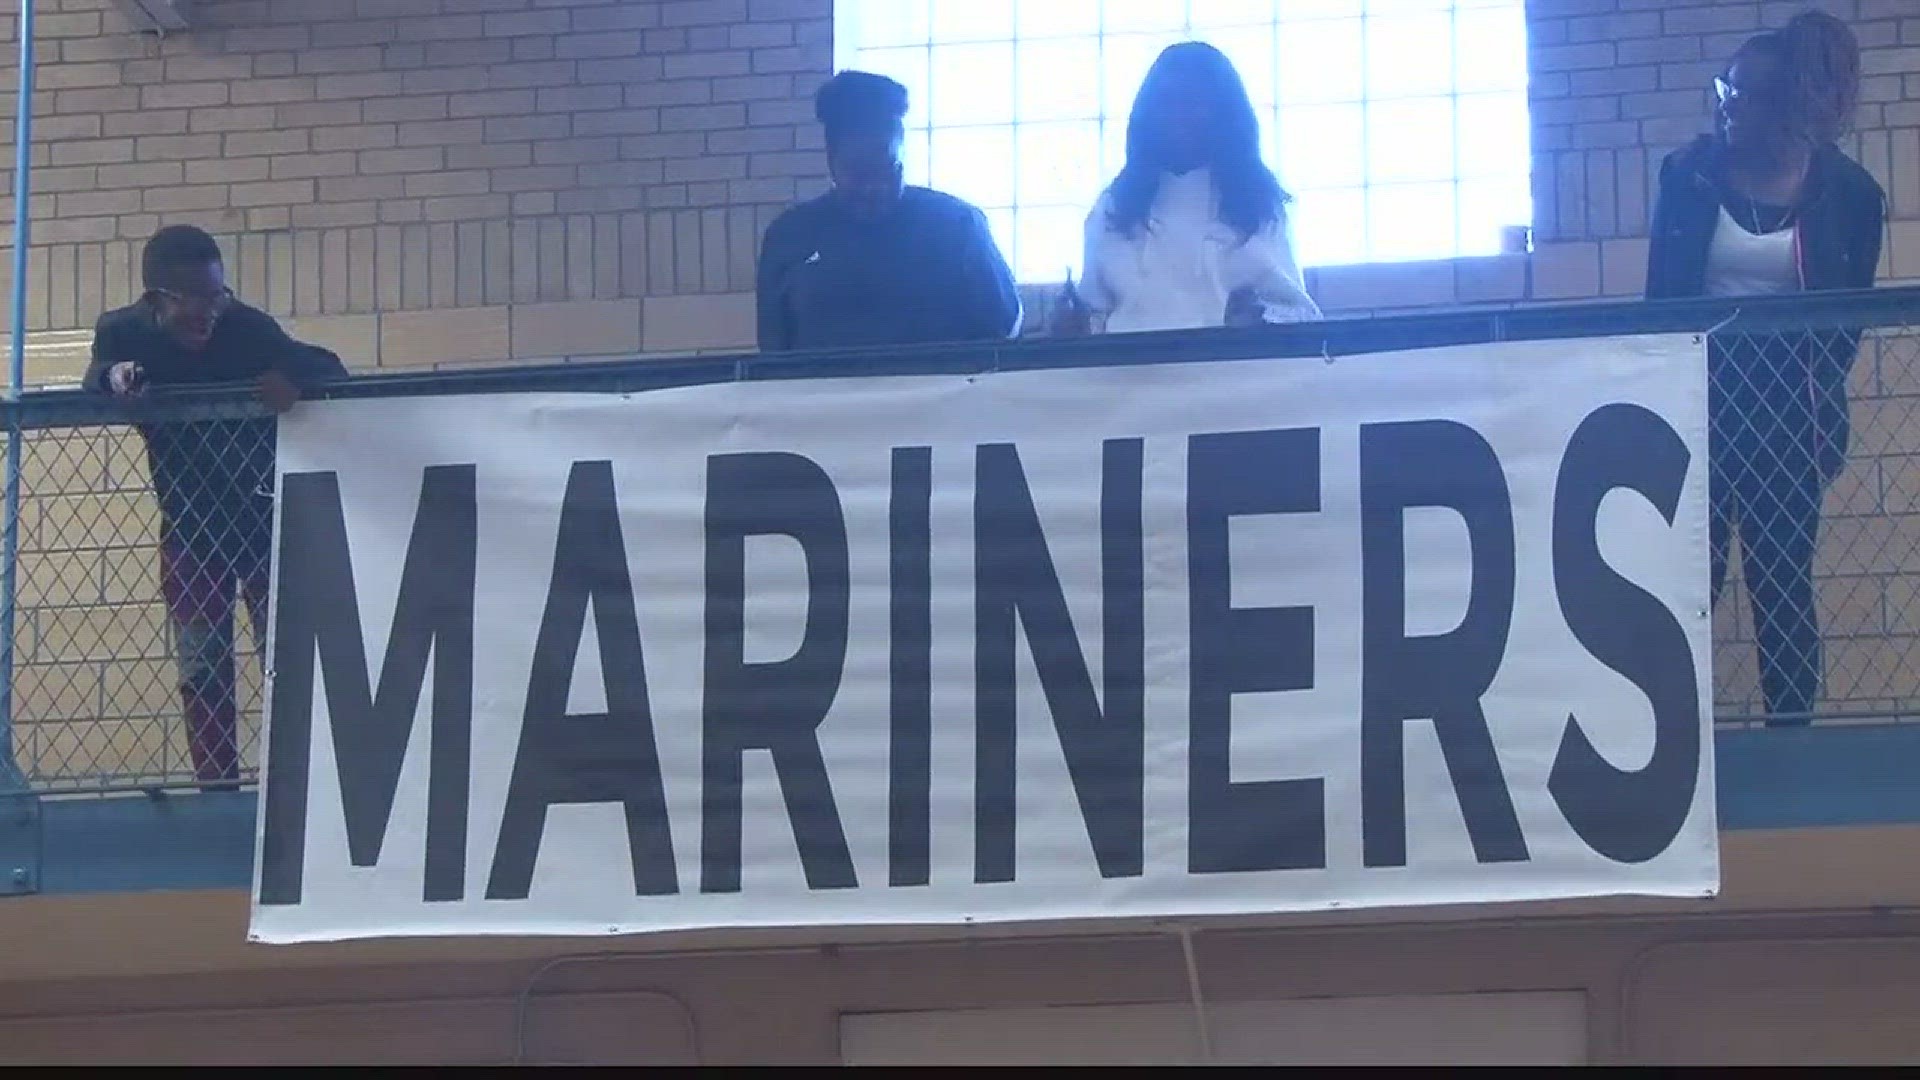 It's the Mariners!